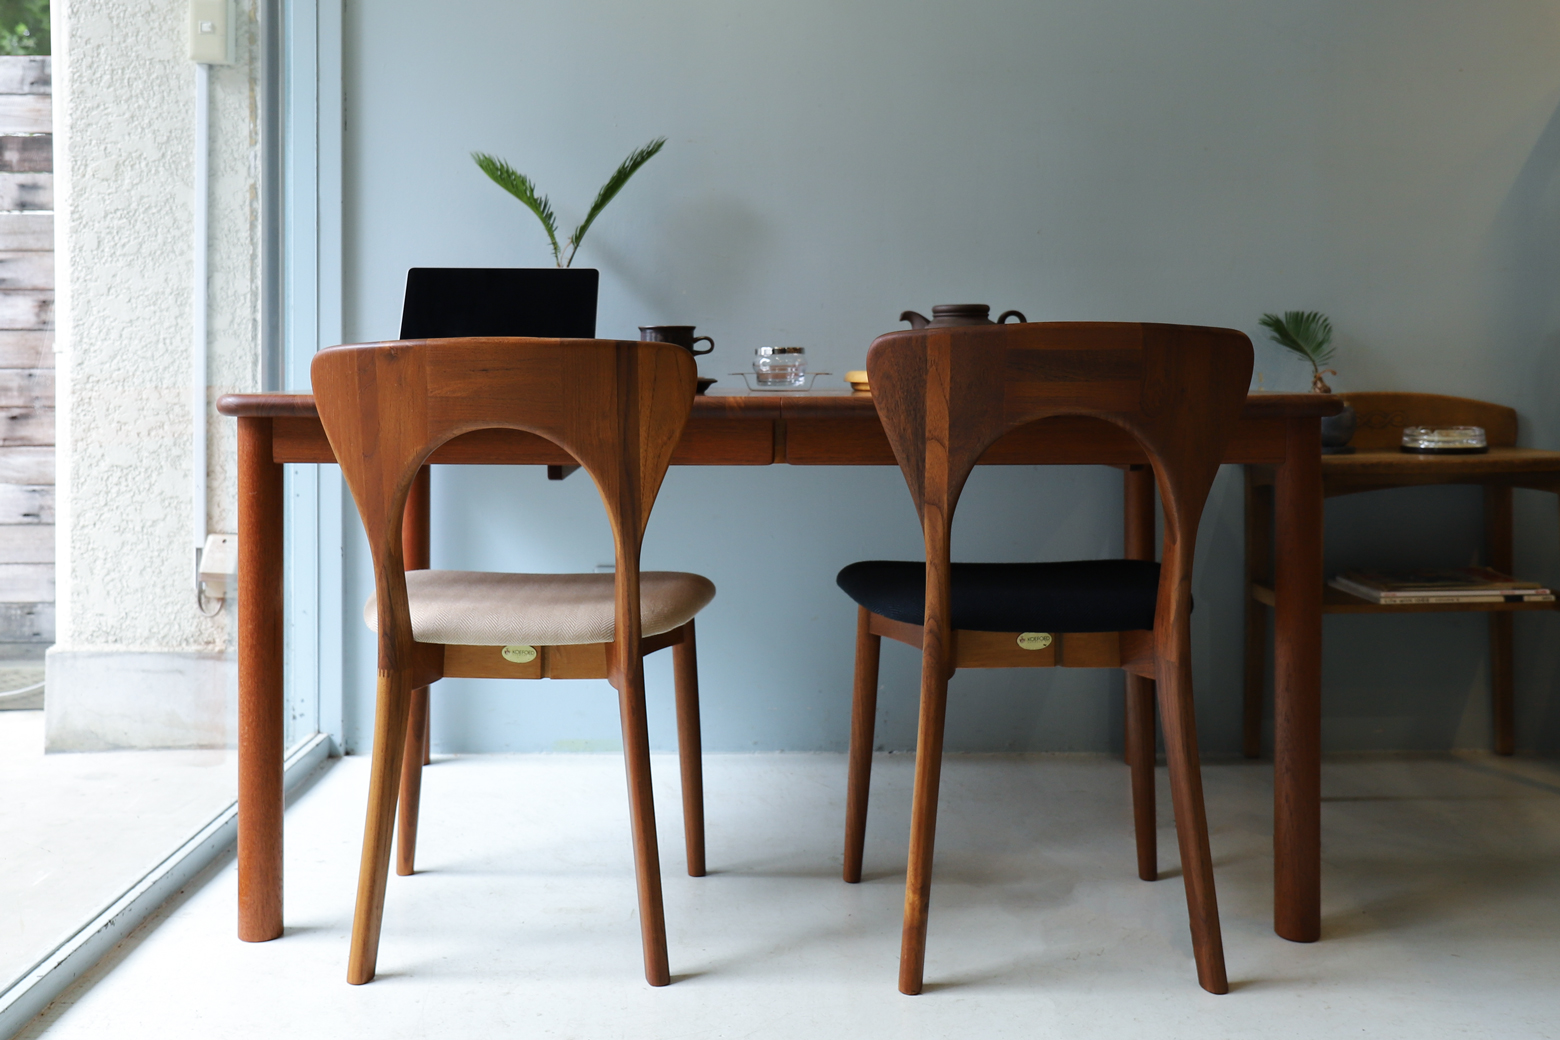 Danish Vintage Dining Chair Peter by Niels Koefoed for KOEFOEDS HORNSLET/デンマーク ヴィンテージ ダイニングチェア ピーター ニールス・コフォード 椅子 北欧家具 チーク材